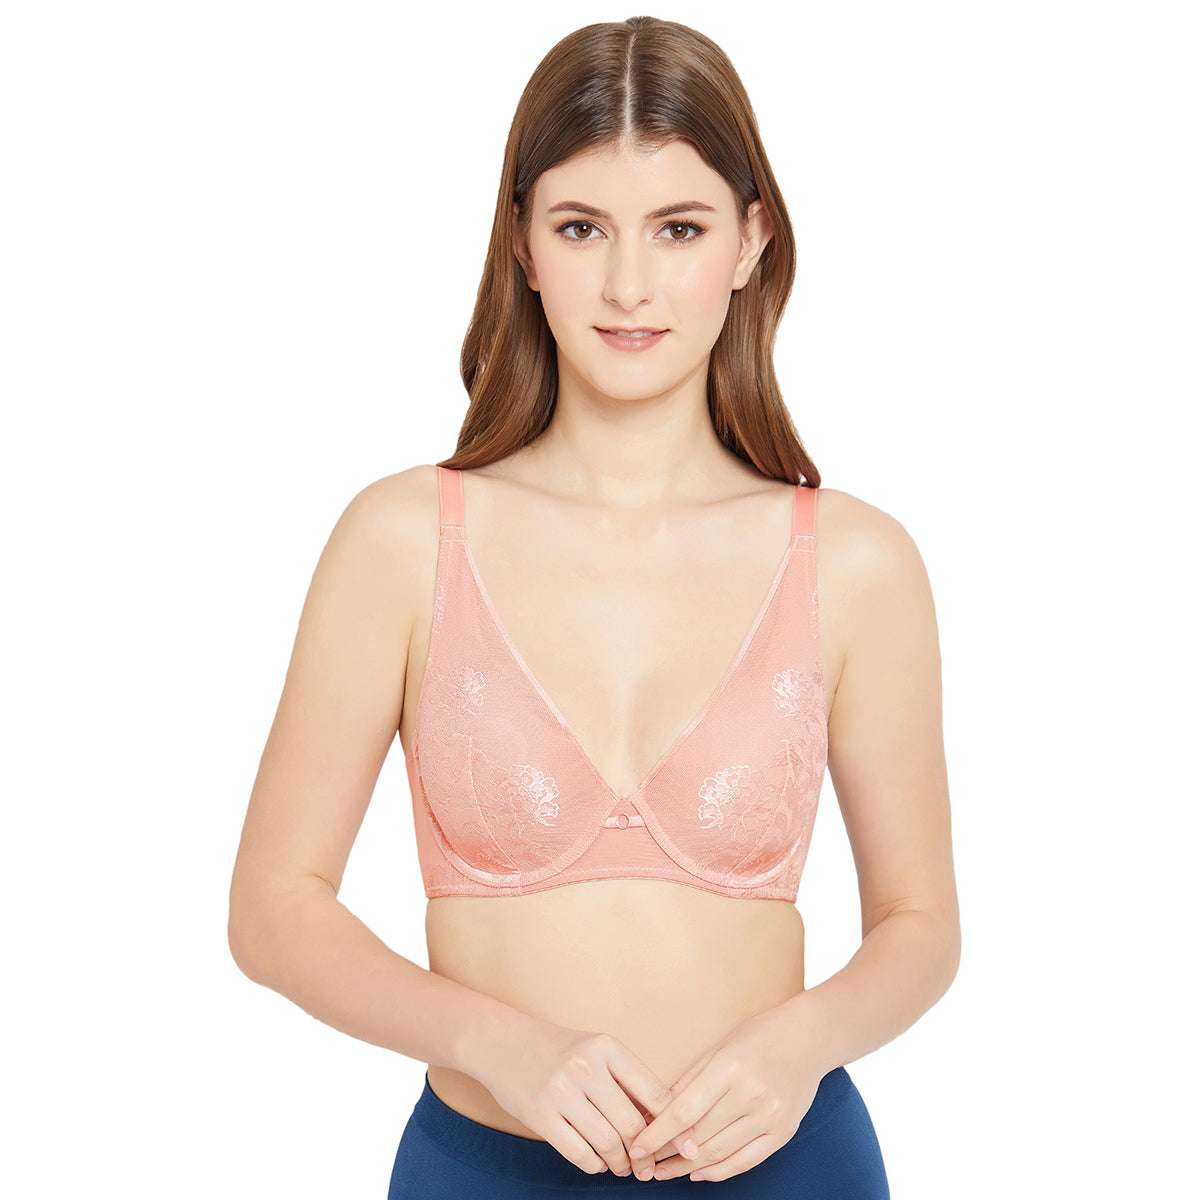 Lace Non Padded Plunge Bra Pack of 2, Lingerie, Bra Free Delivery India.